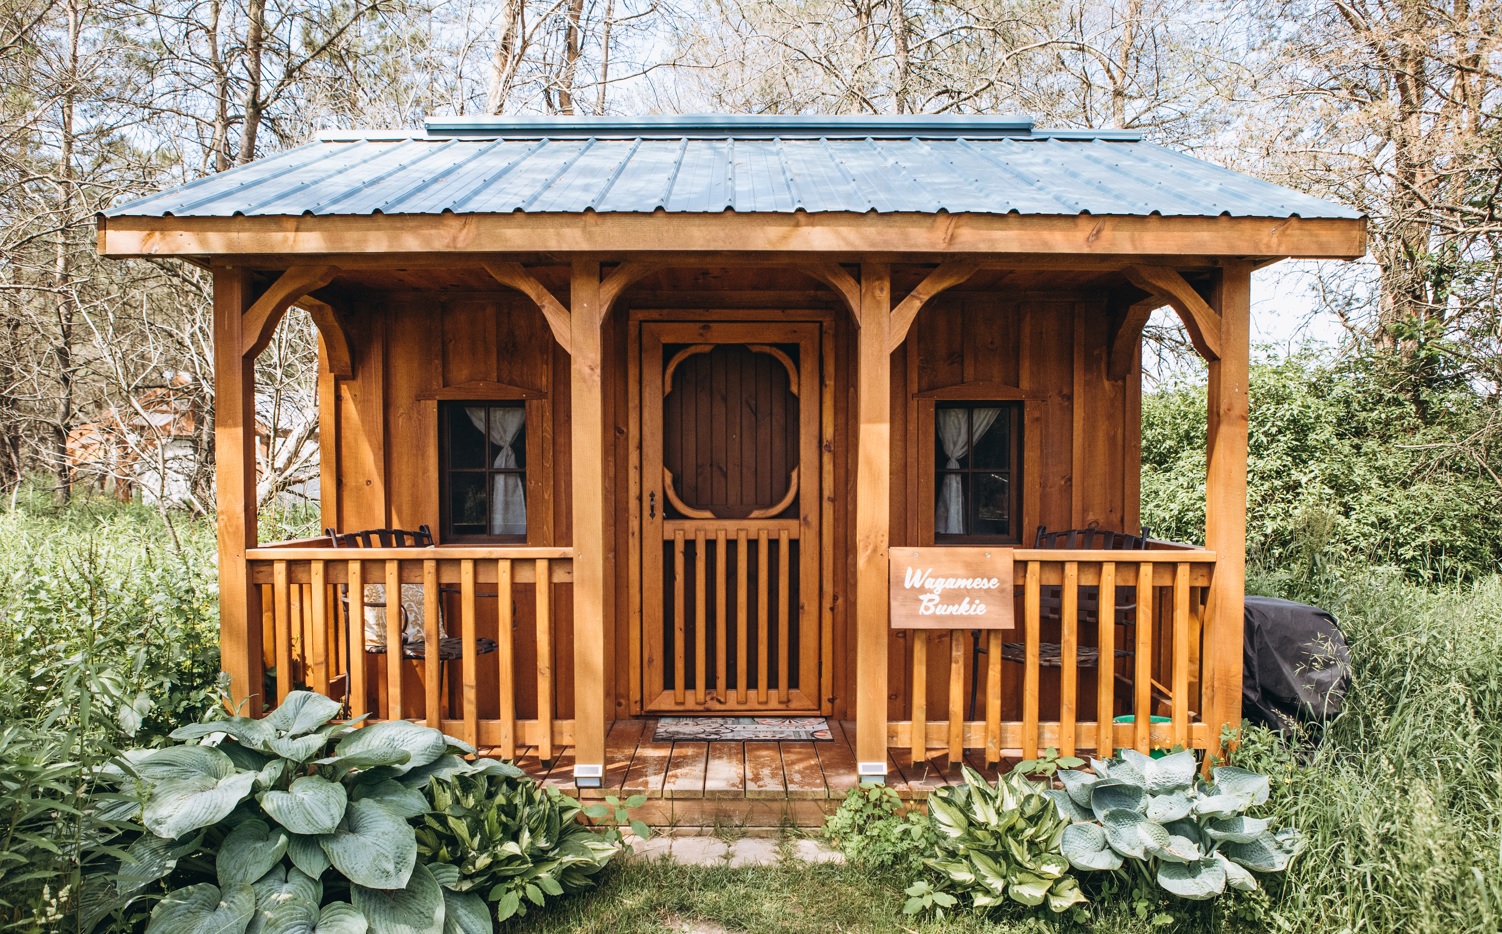 Wagamese Bunkie: A Cozy Glamping Getaway